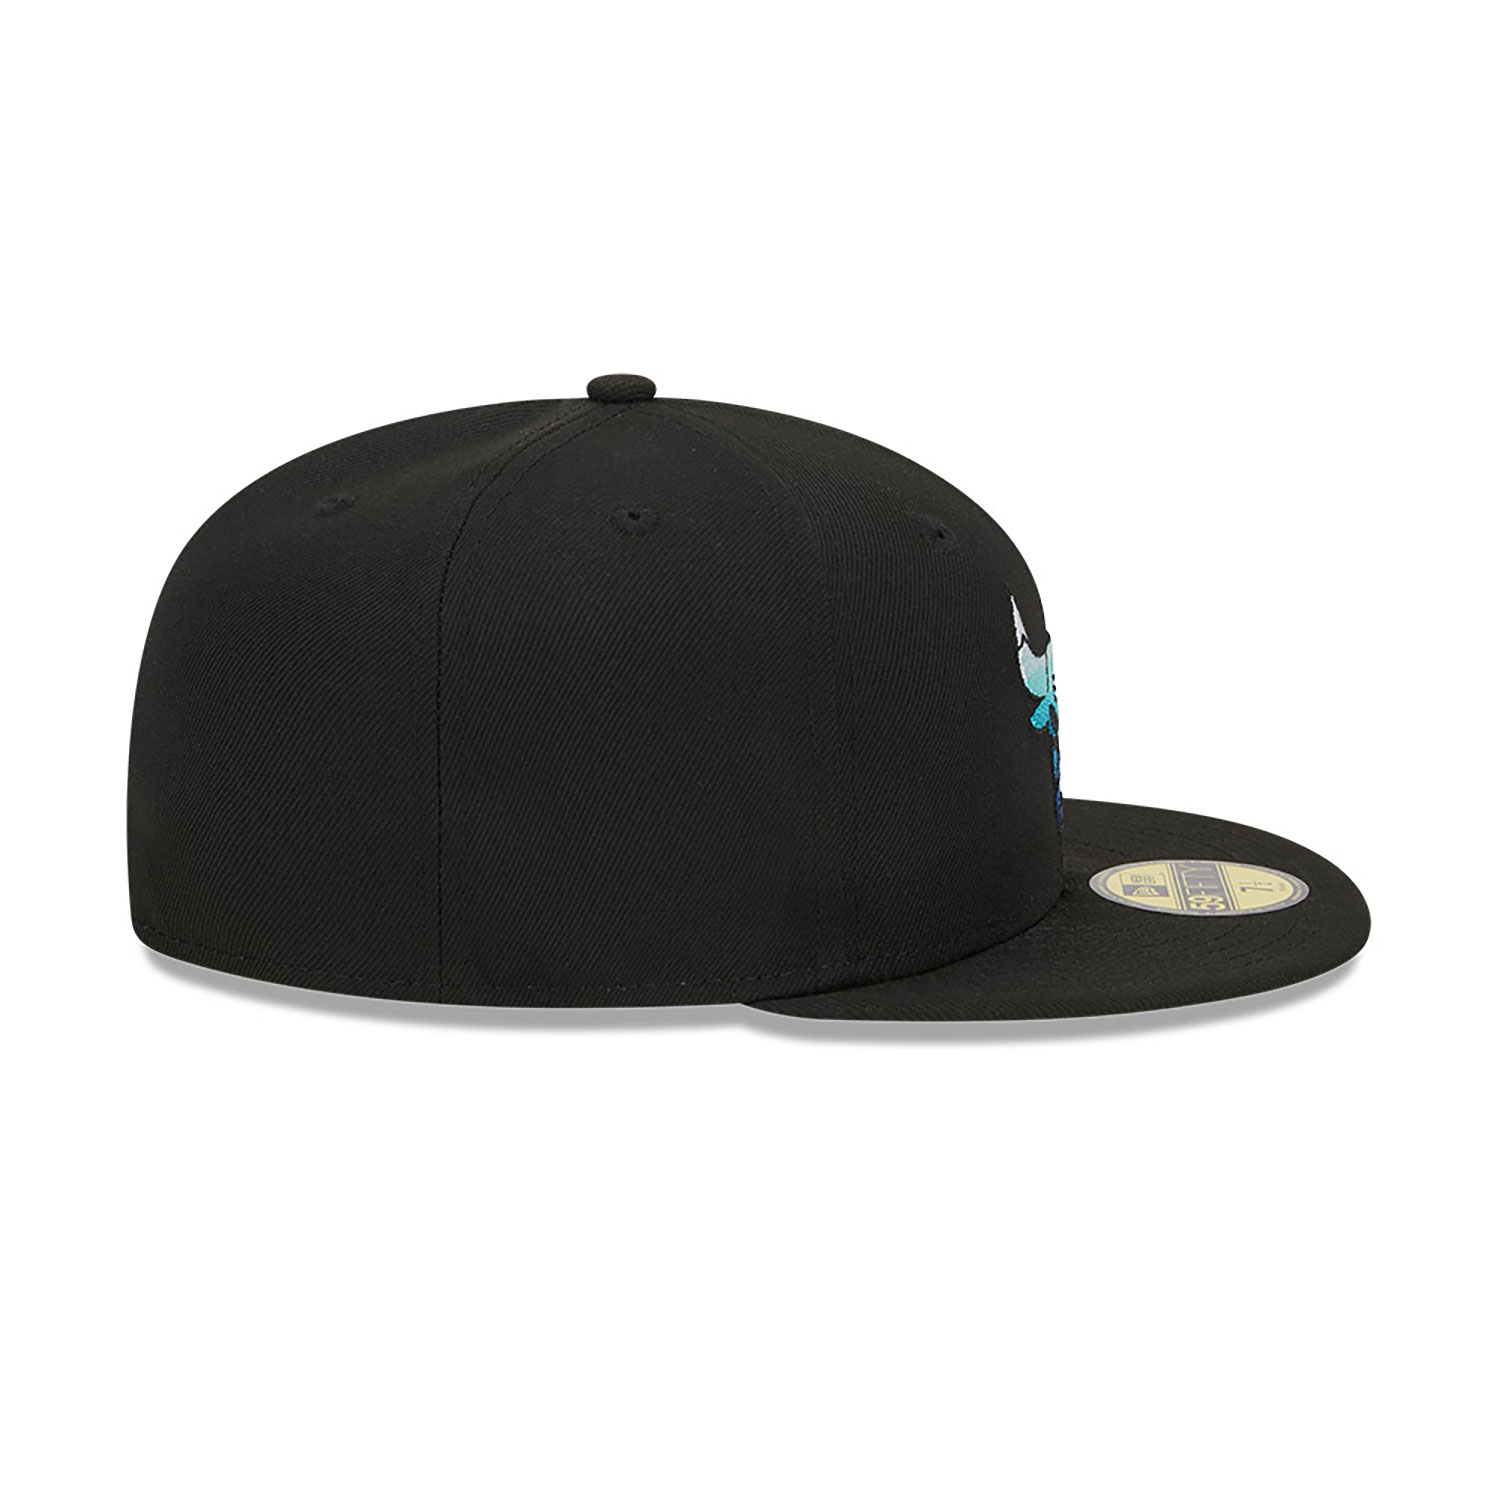 Chicago Bulls Gradient Black 59FIFTY Fitted Cap